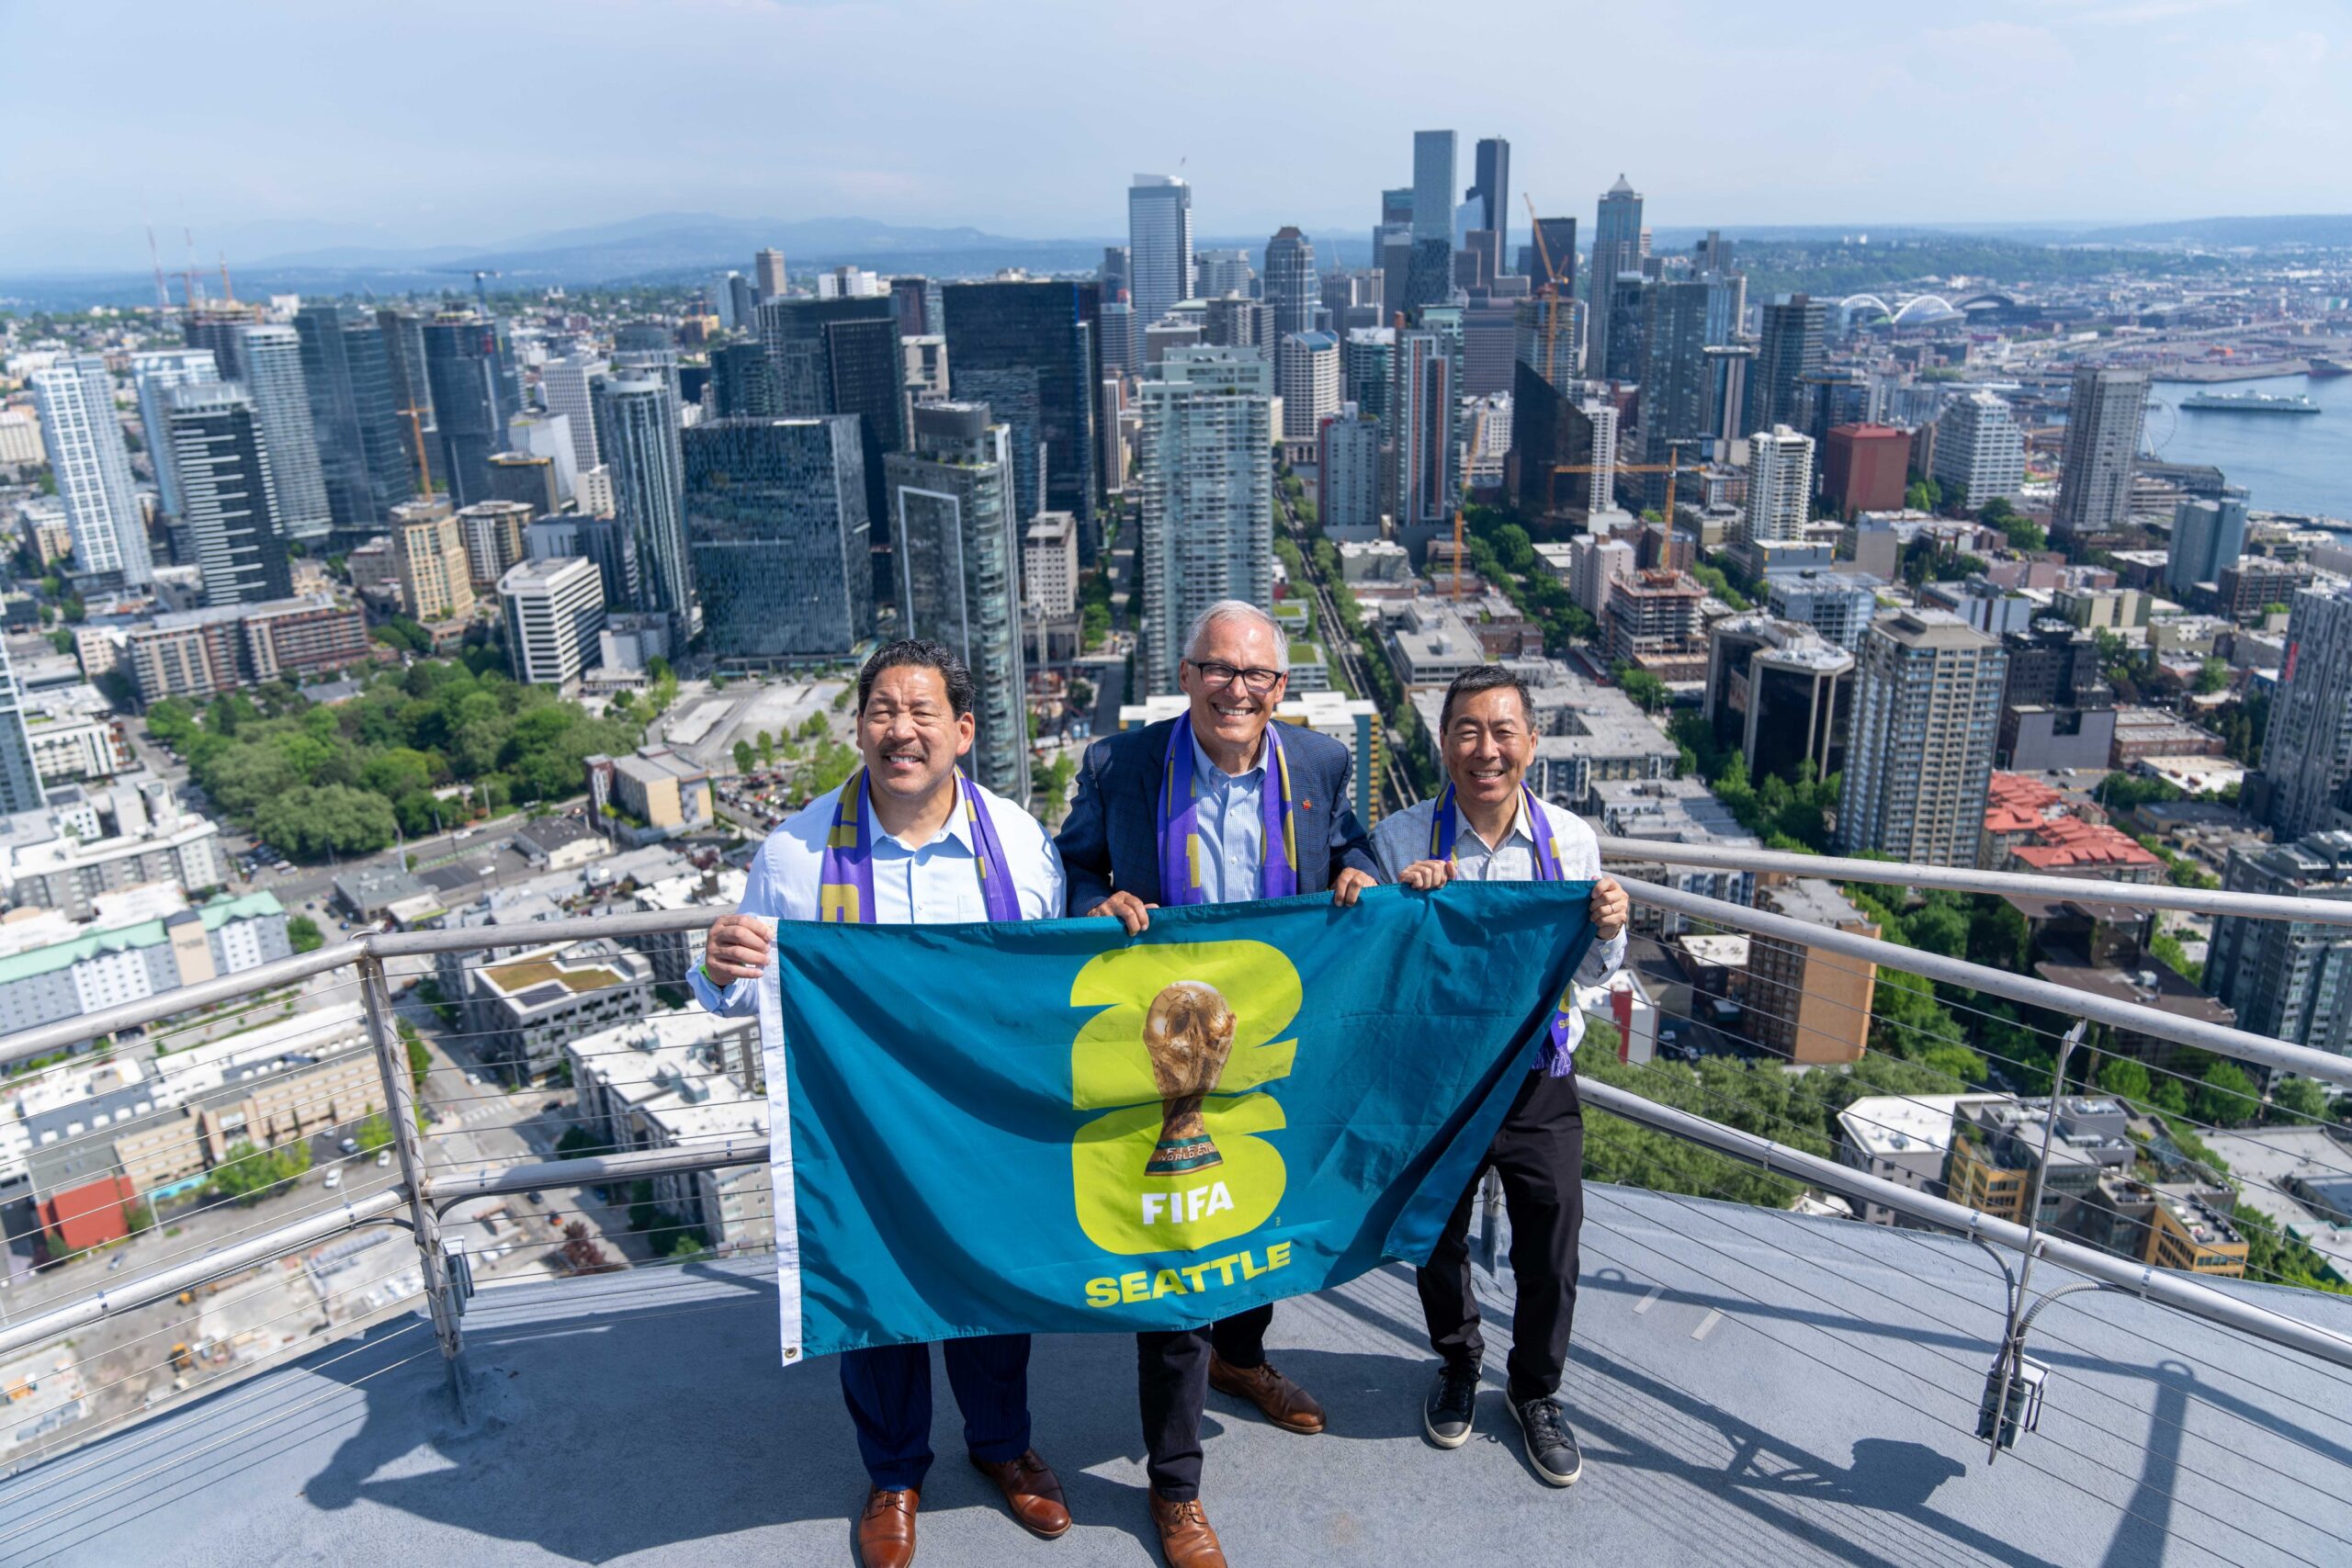 Seattle World Cup 2026 aims to support marginalized communities